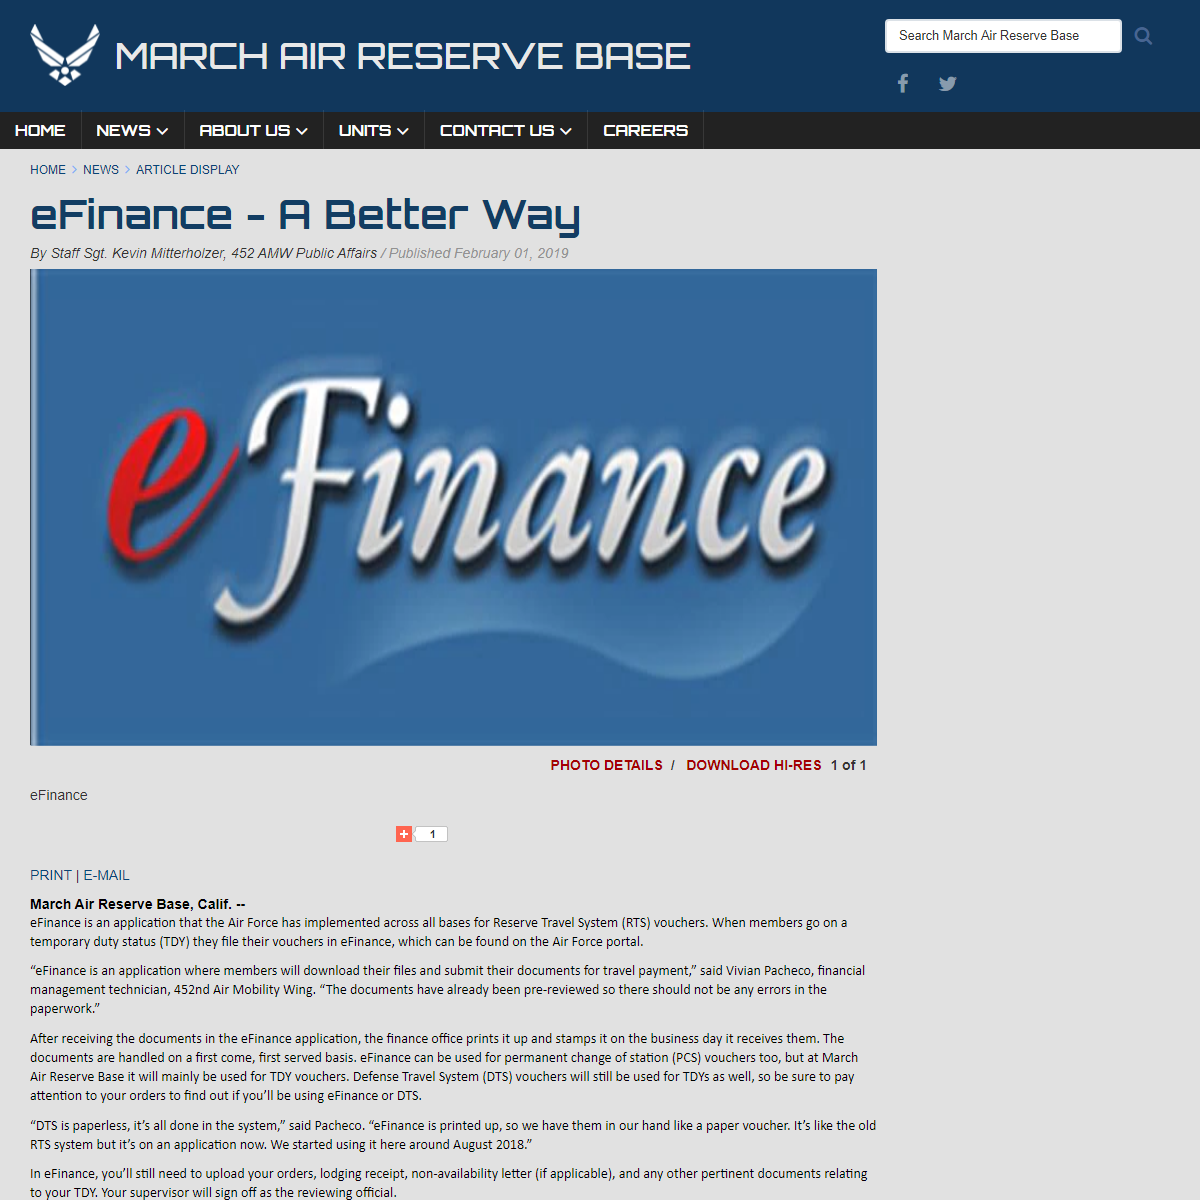 A complete backup of https://www.march.afrc.af.mil/News/Article-Display/Article/1773138/efinance-a-better-way/